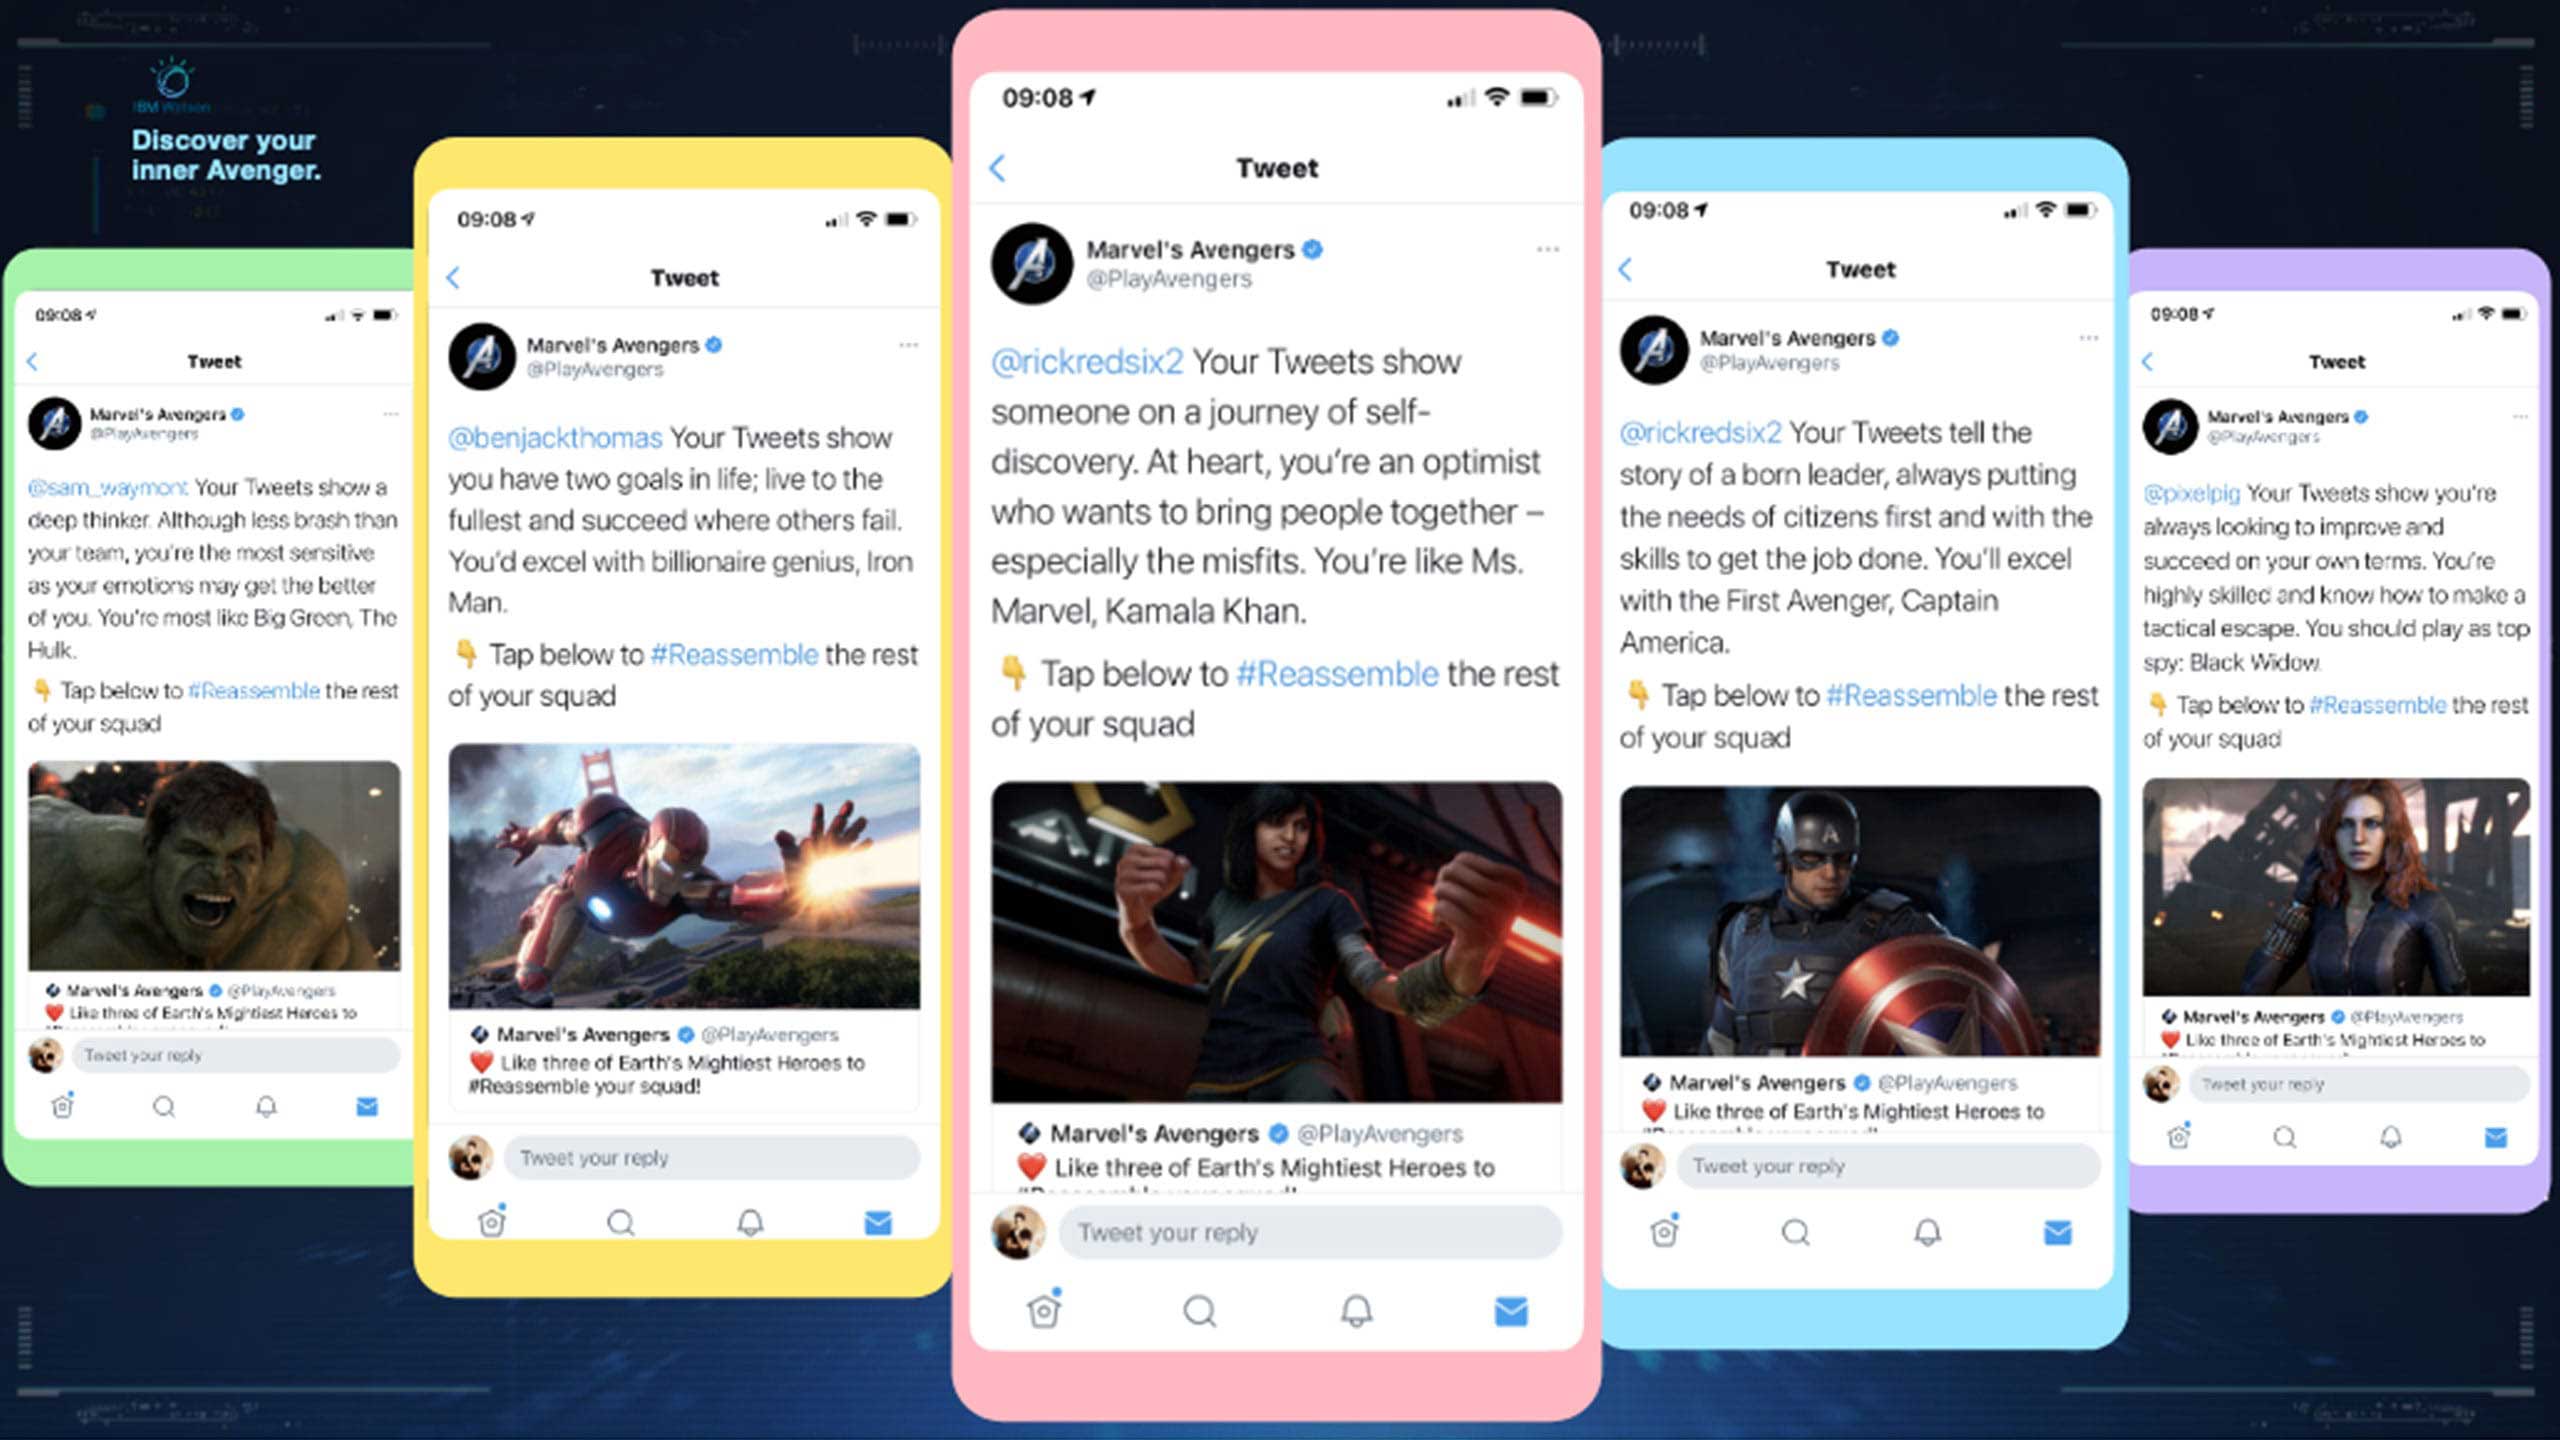 Phone screens showing the Avengers tweets sent to users informing them which Avenger they were.